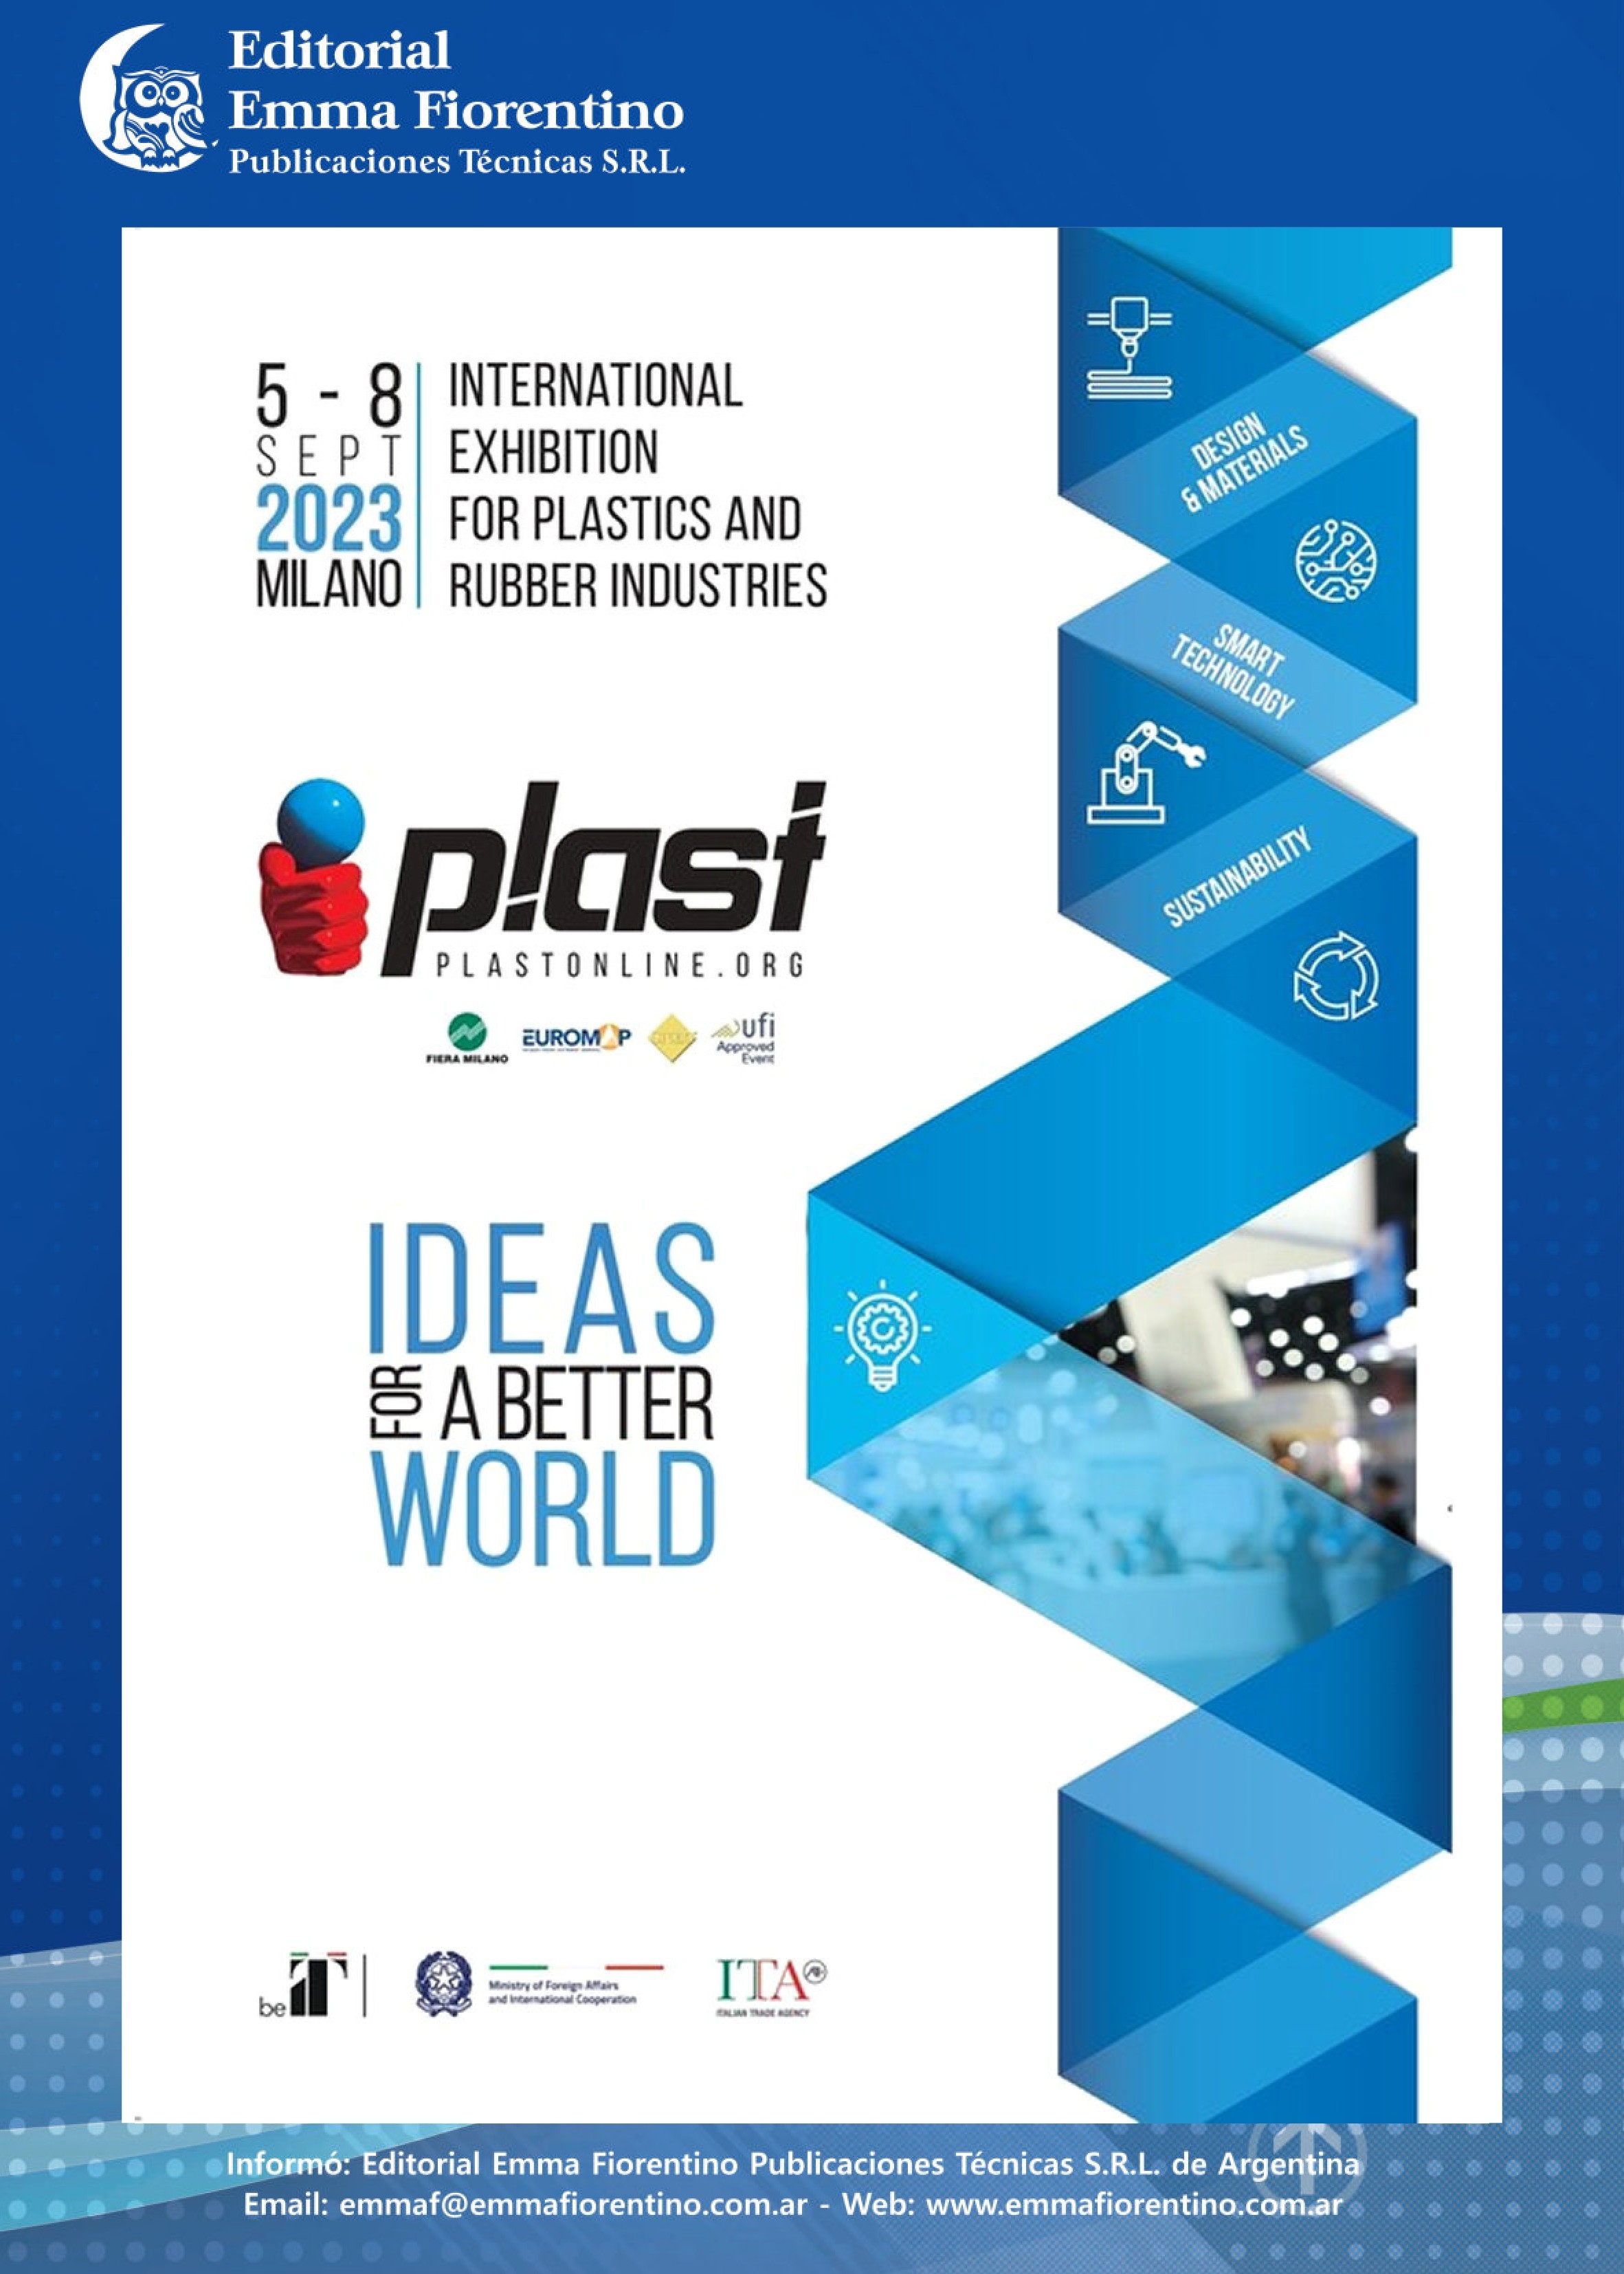 INTERNATIONAL EXHIBITION FOR PLASTICS AND RUBBER INDUSTRIES
5-8 SEPTIEMBRE 2023